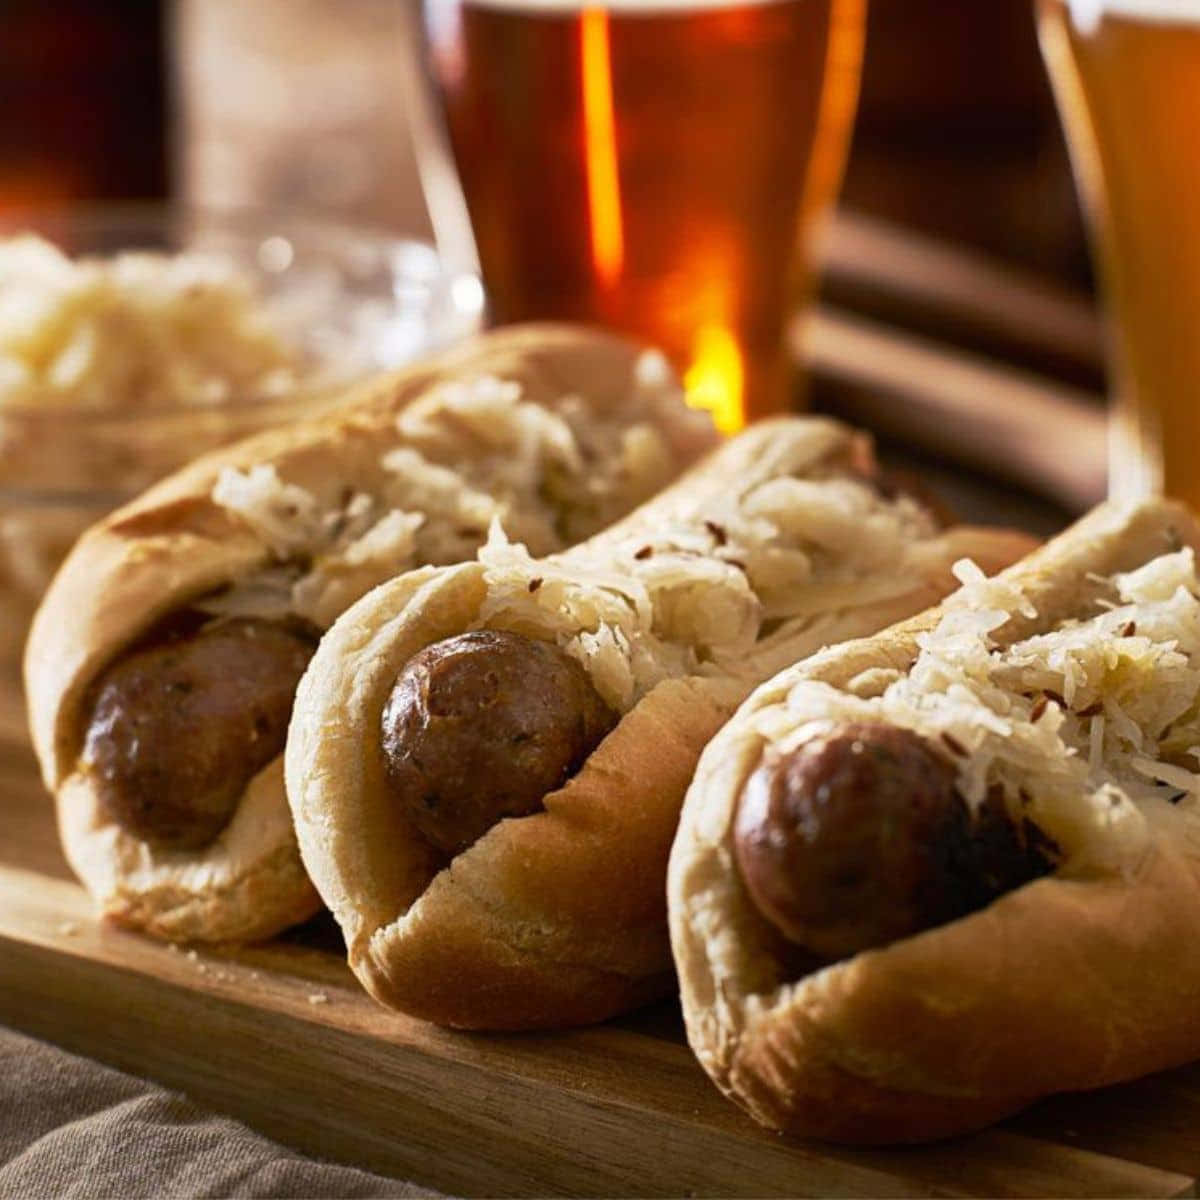 Three Hot Dogs With Sauerkraut And Beer On A Wooden Board